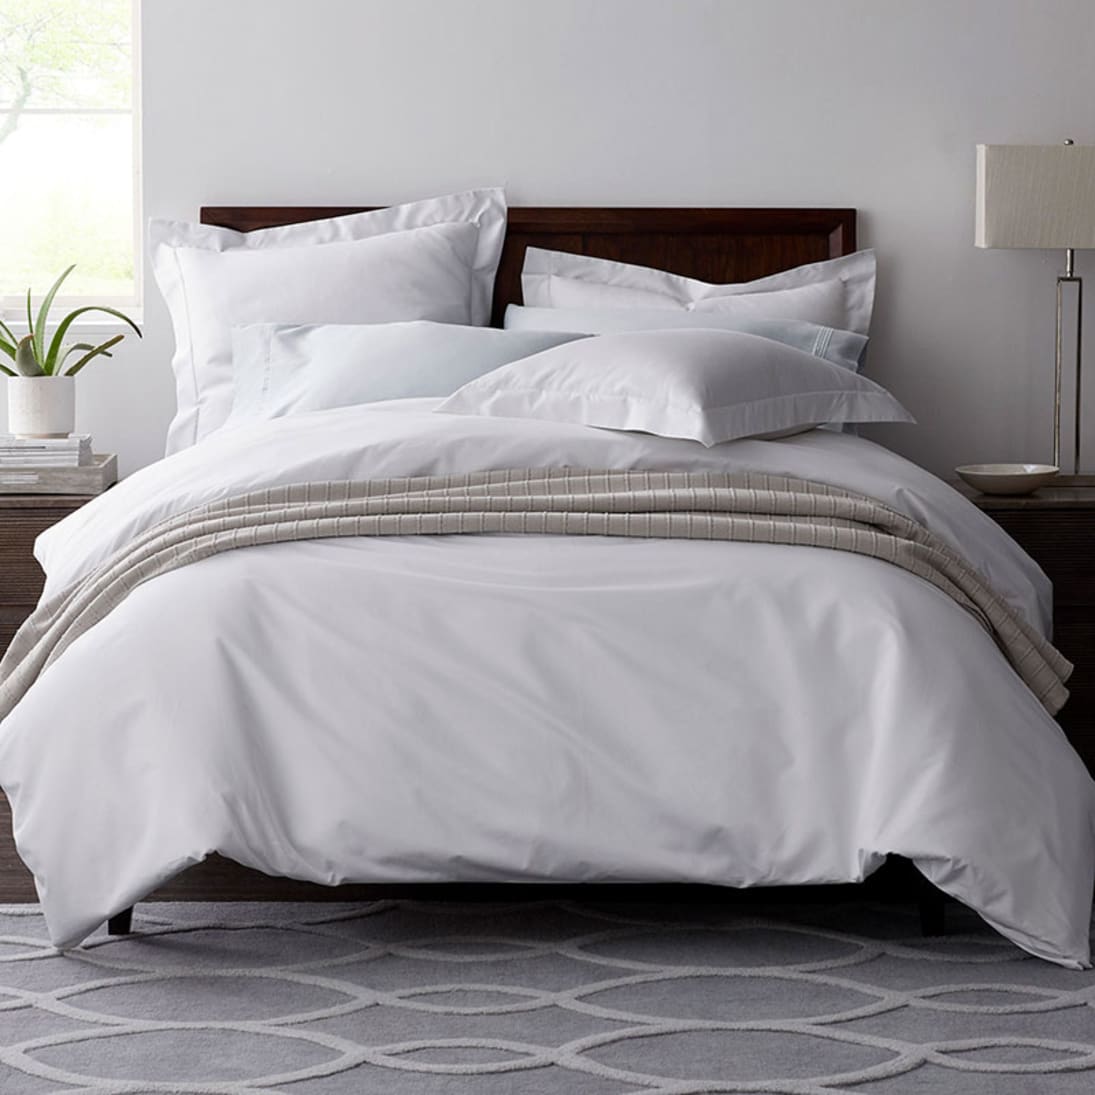 600 Thread Count Egyptian Cotton Sateen, Grey And White Duvet Cover King